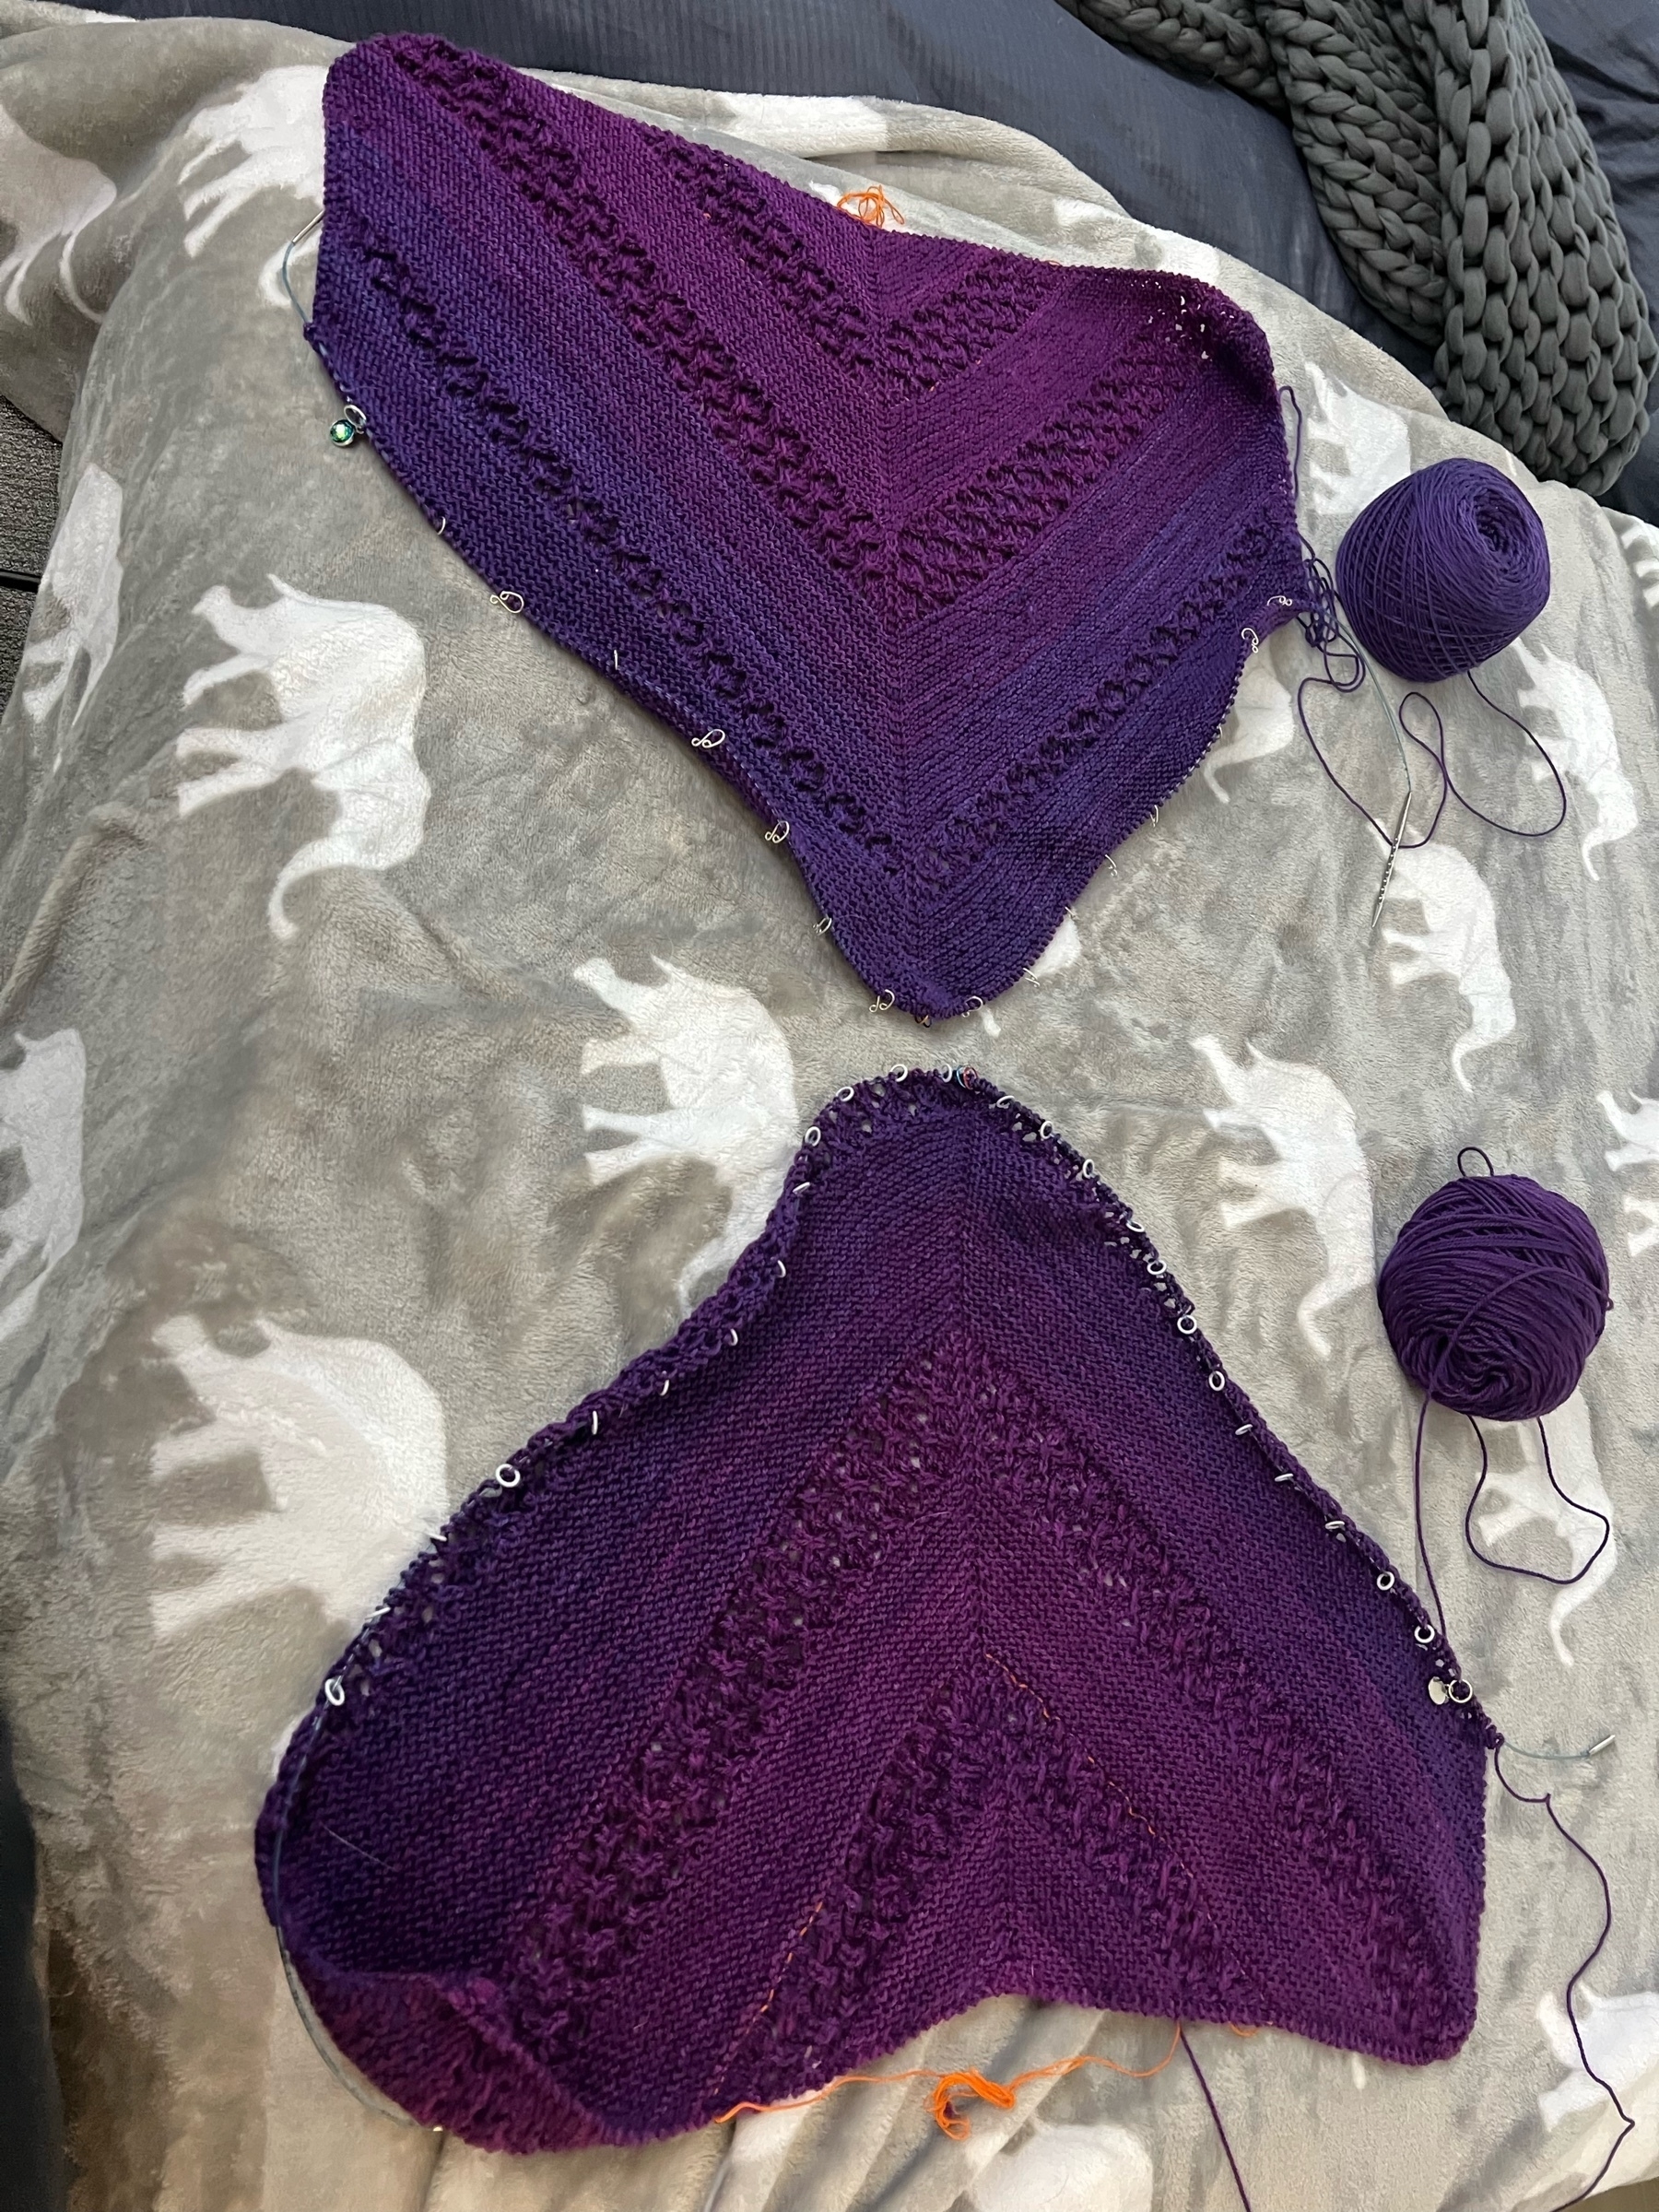 Two largeish trianglular purple knitted things on a bed, points facing one anither.